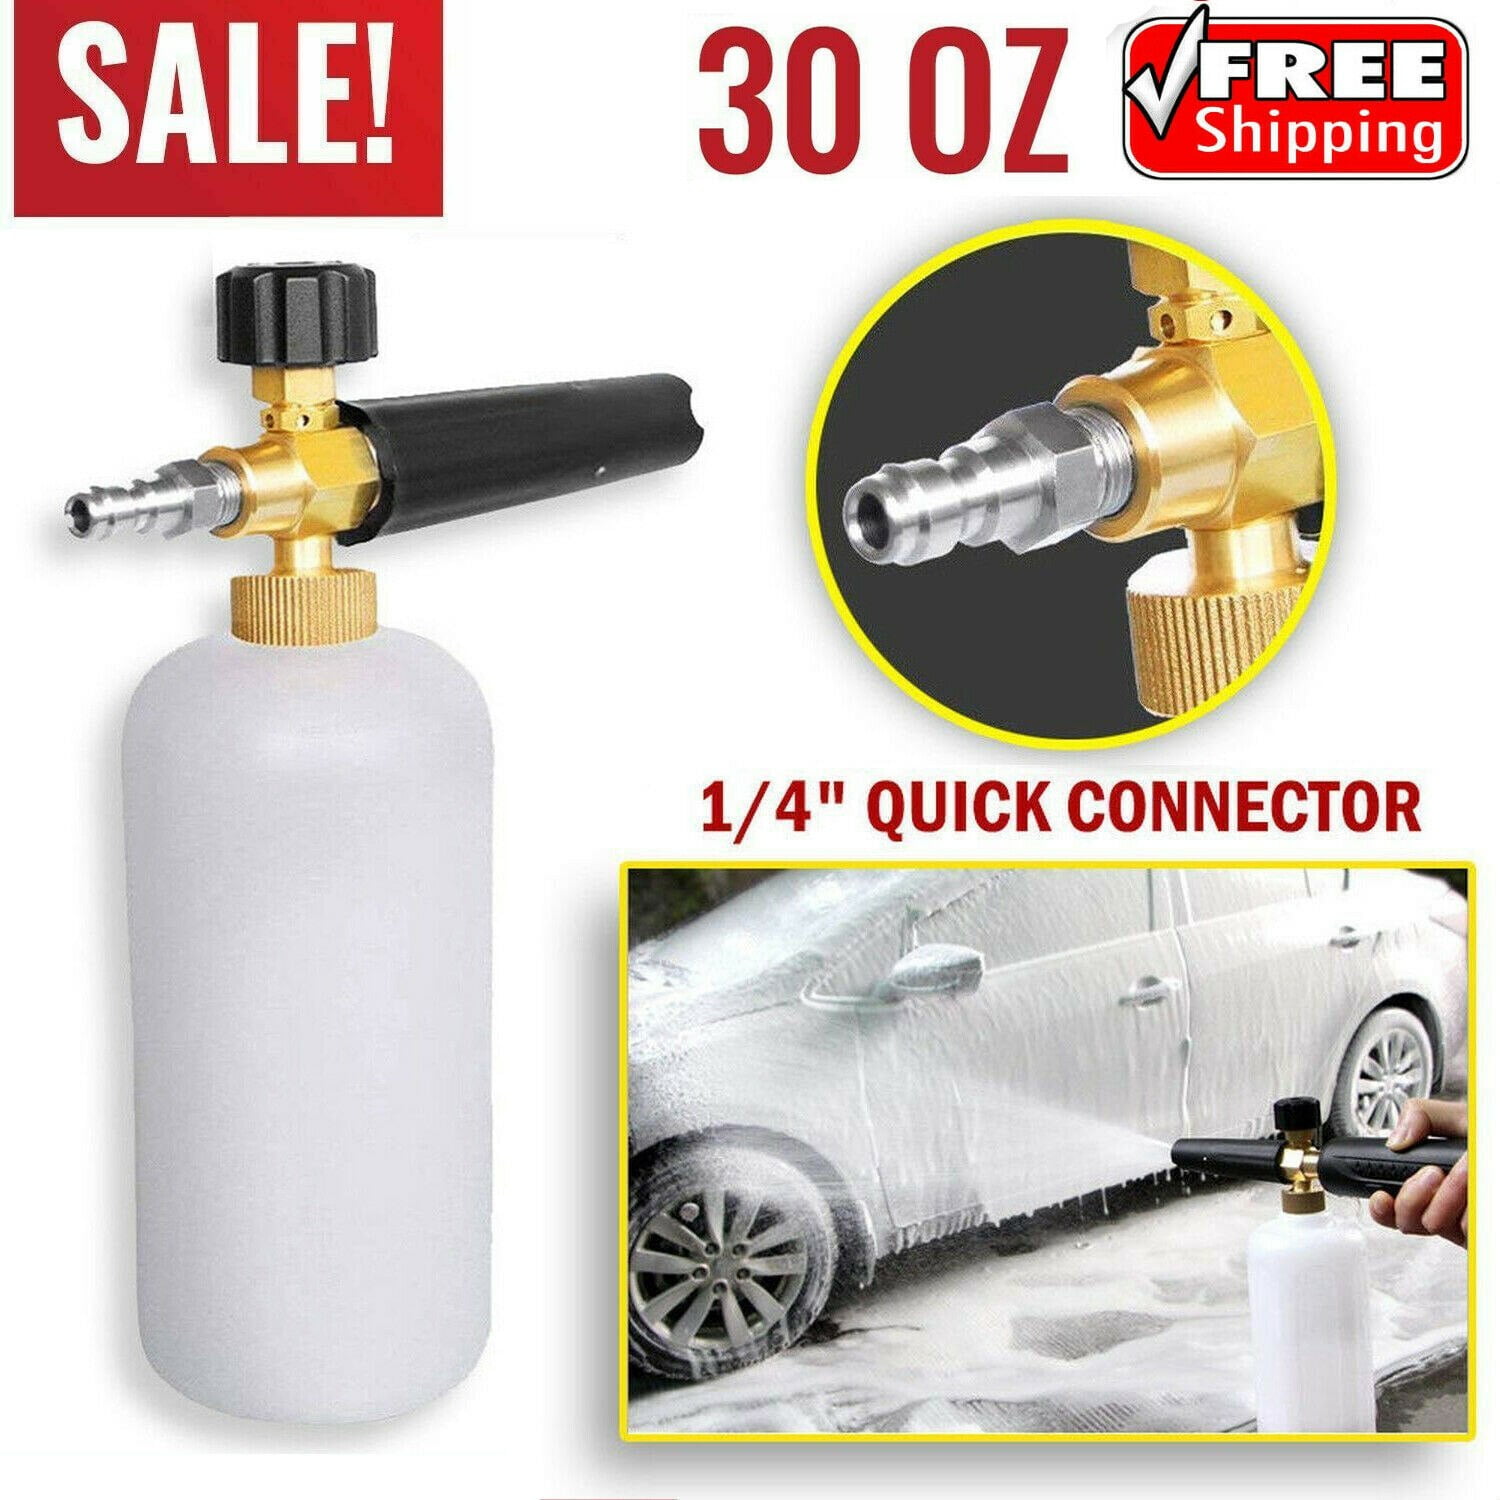 Details about   Pressure Snow Foam Washer Jet Car Wash Adjustable Lance Soap Spray Cannon USA 